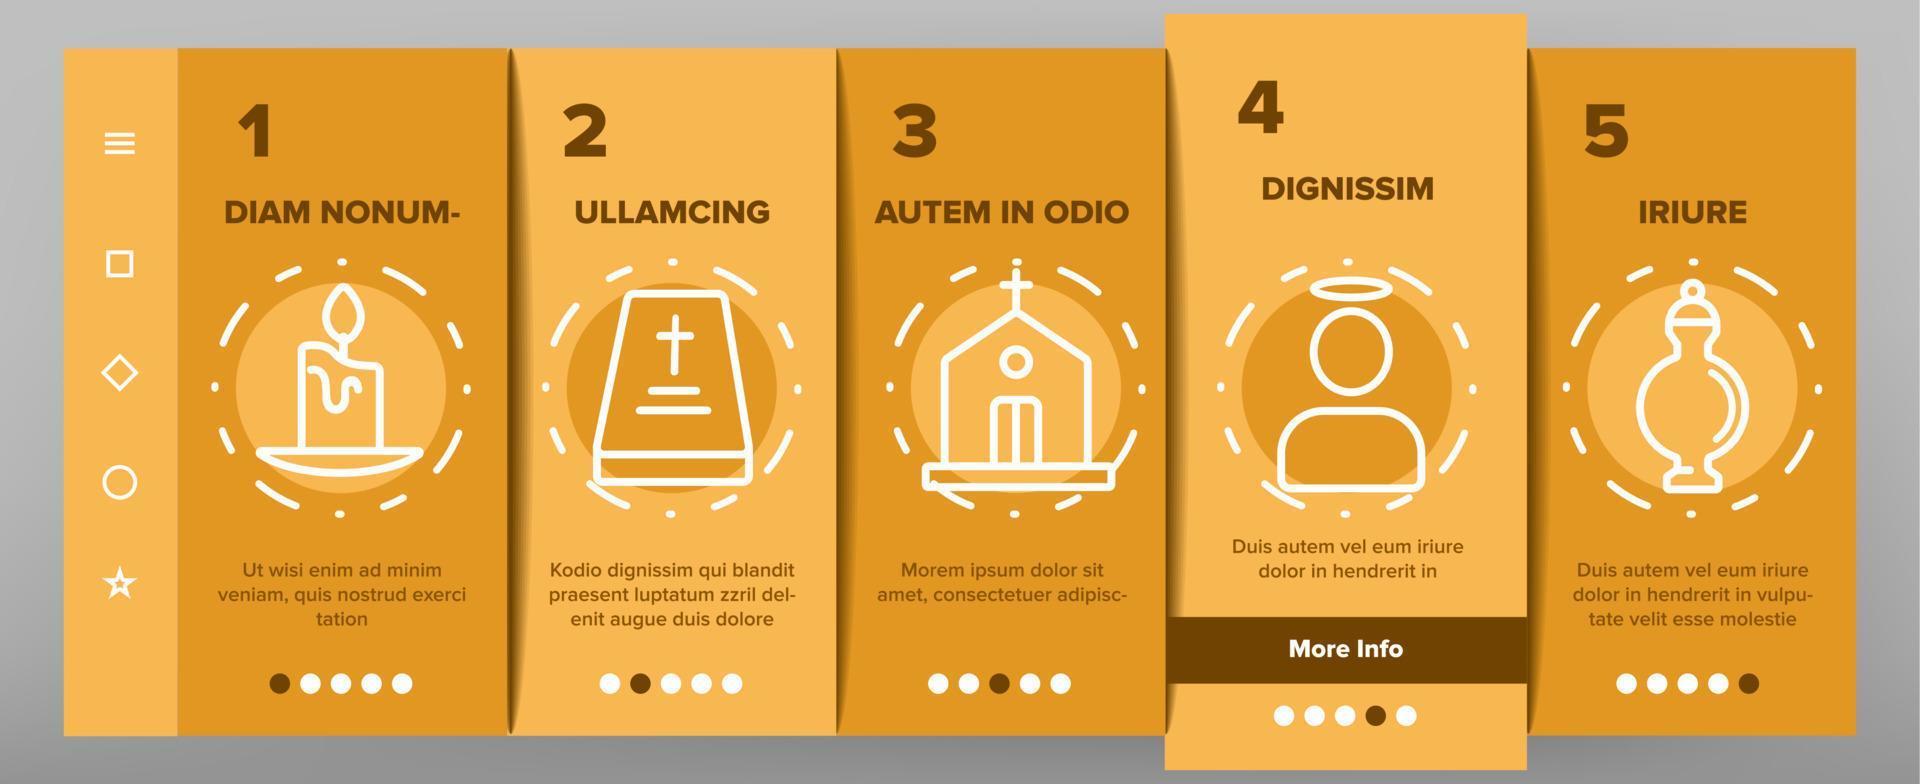 Funeral Burial Ritual Onboarding Icons Set Vector